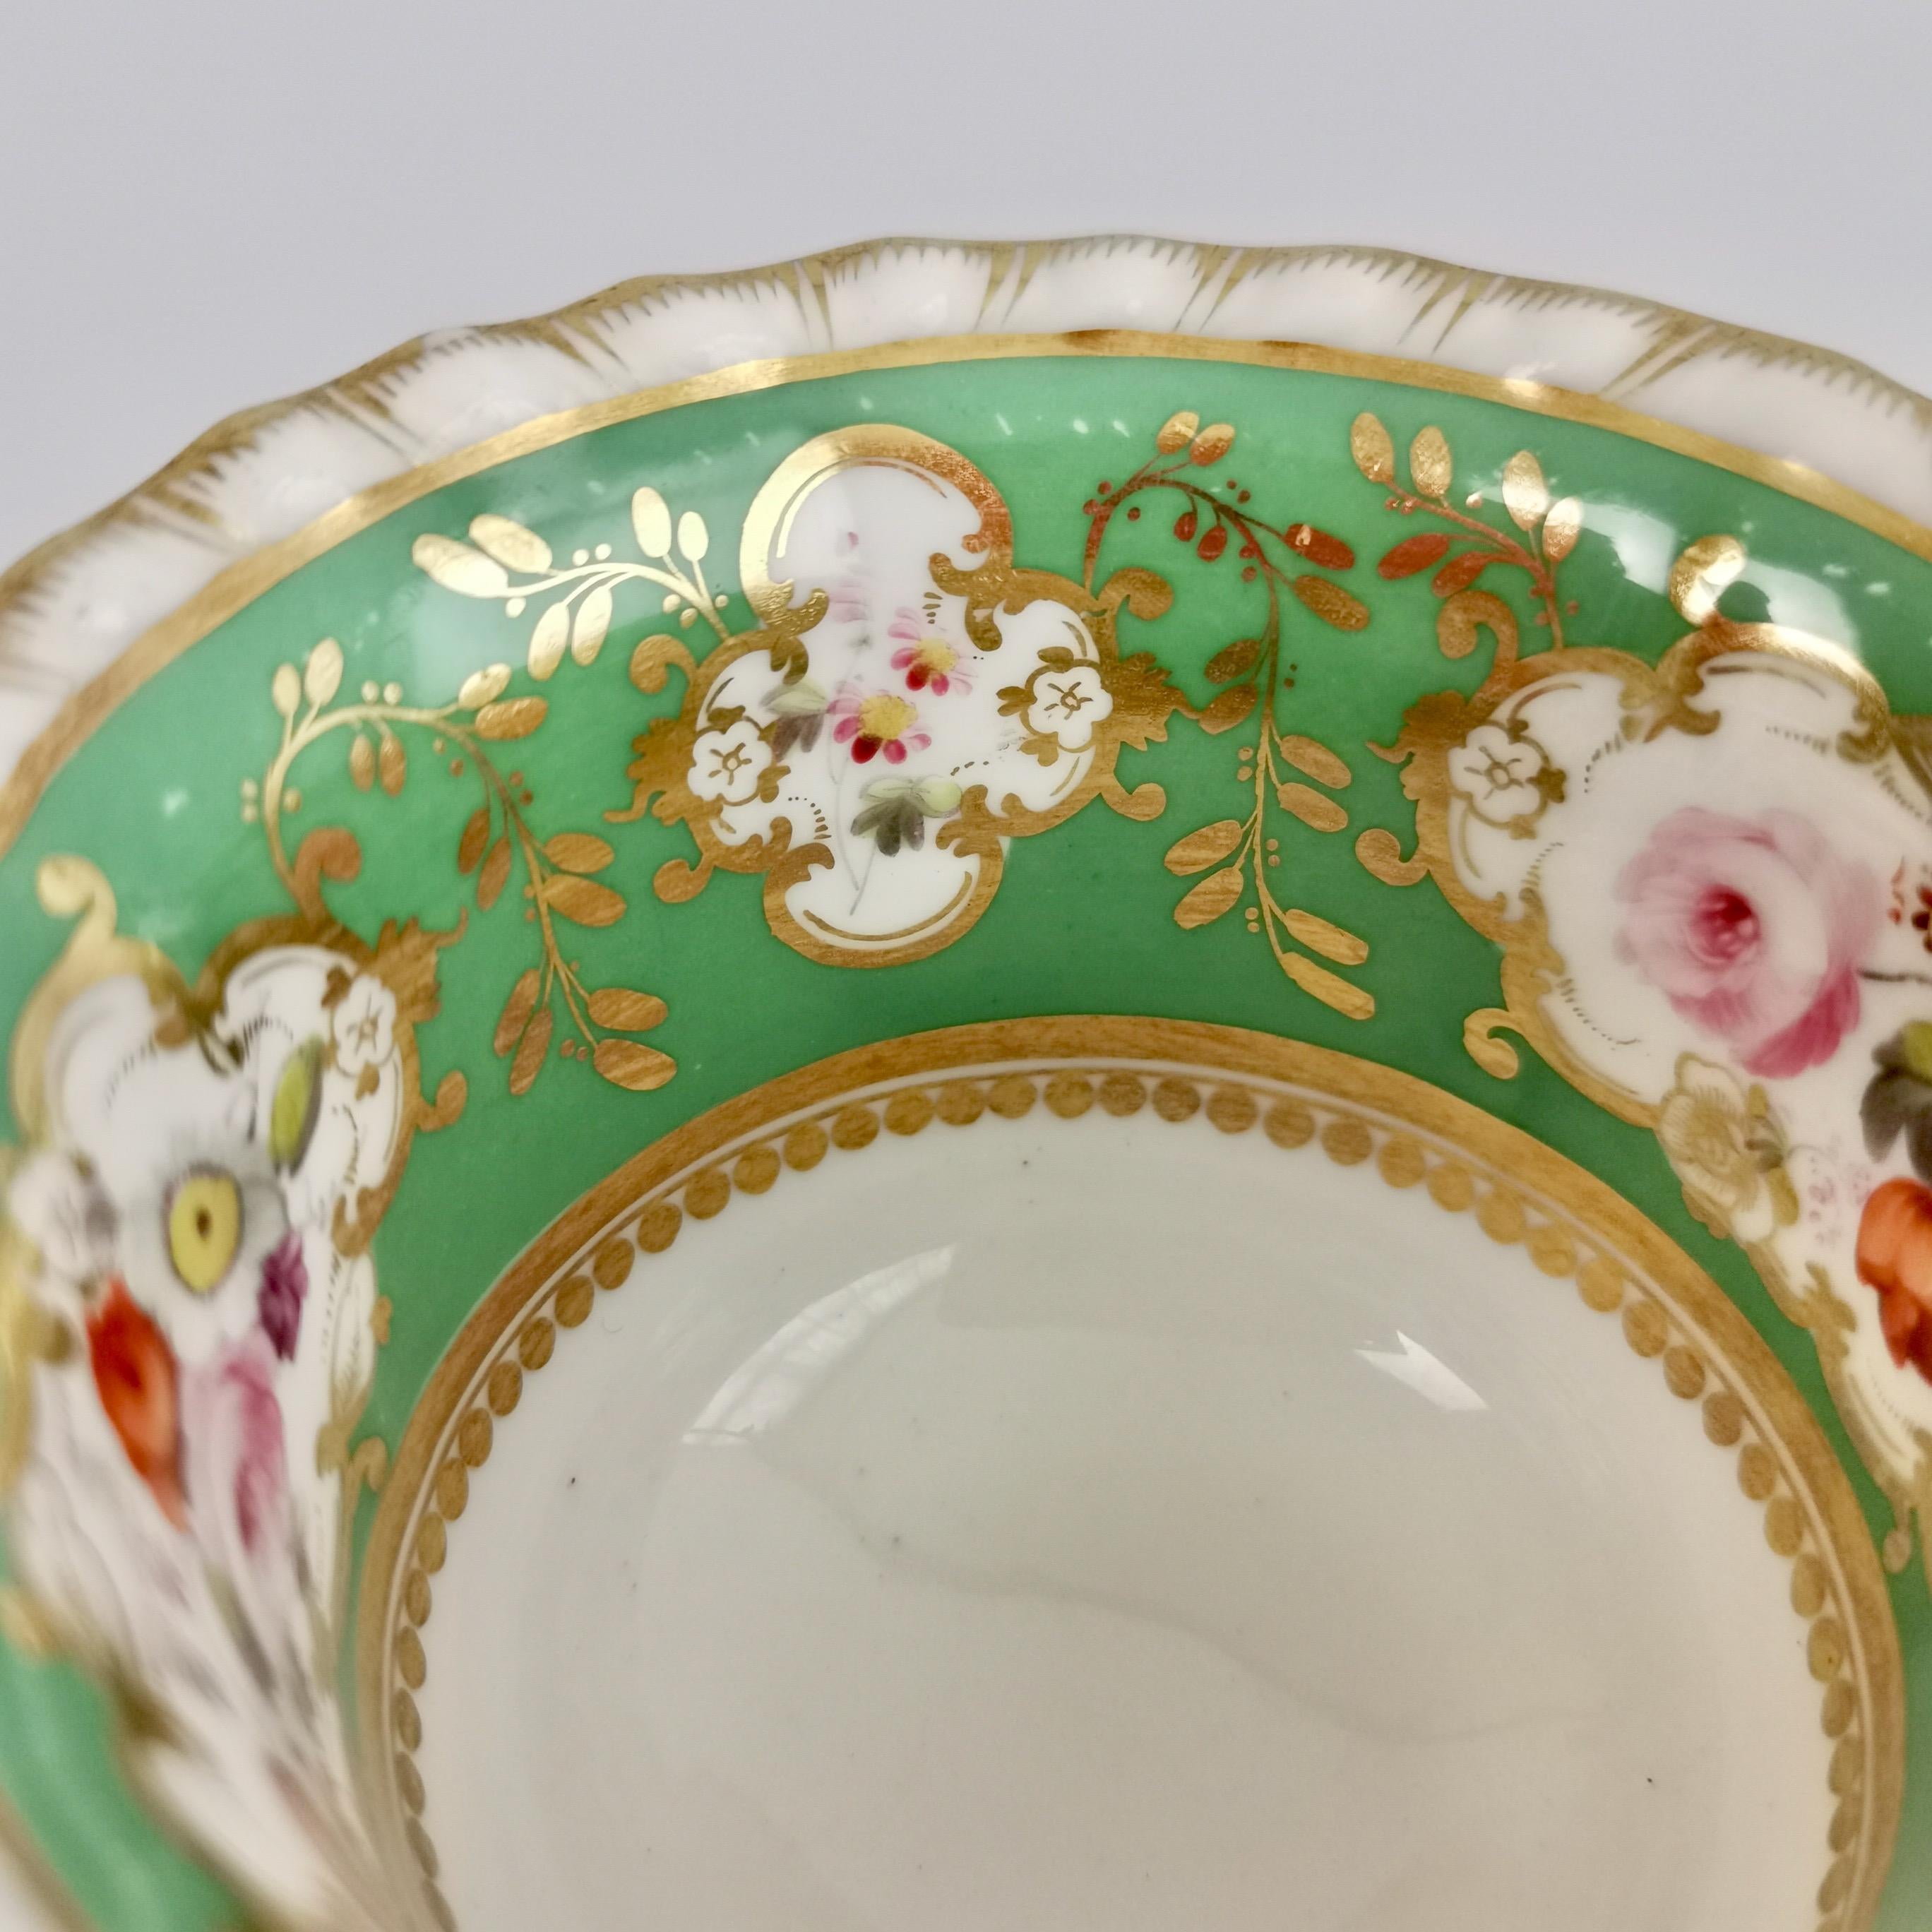 English Minton Porcelain Orphaned Coffee Cup, Green with Flowers, ca 1825